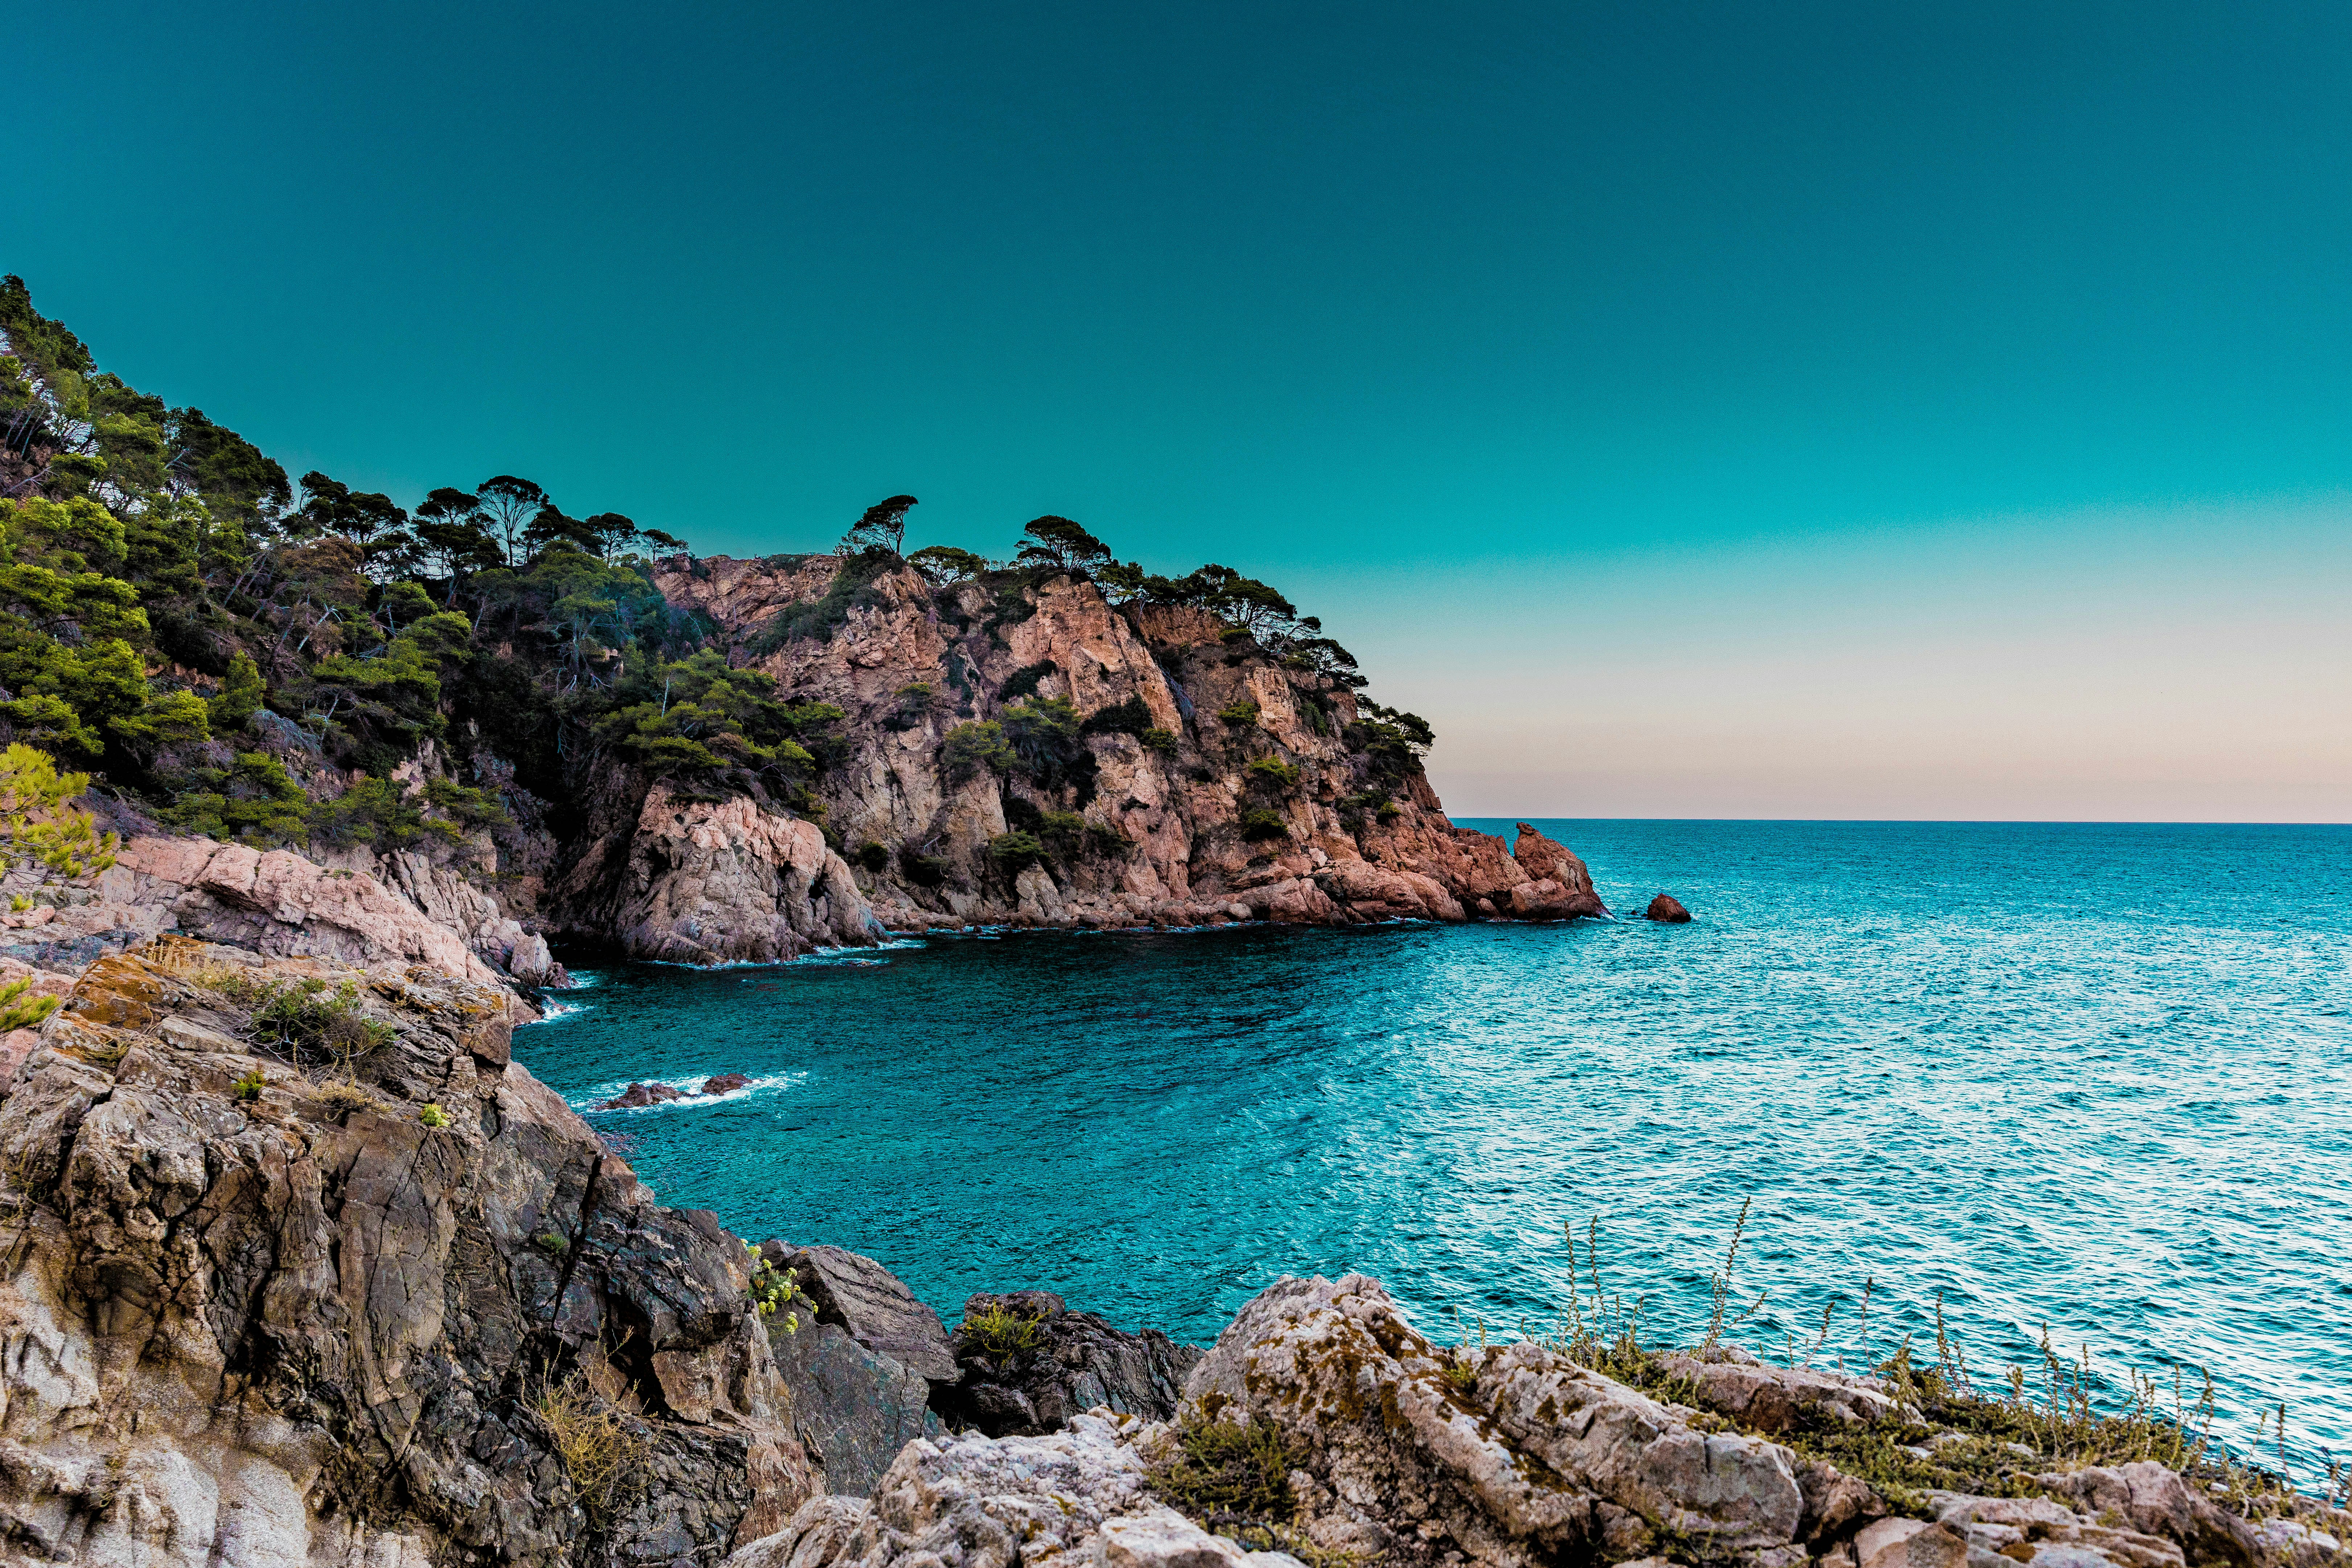 Scenic view of secluded coves with turquoise waters nestled between rugged cliffs and greenery in Marbella, embodying the untouched beauty of the Costa del Sol.